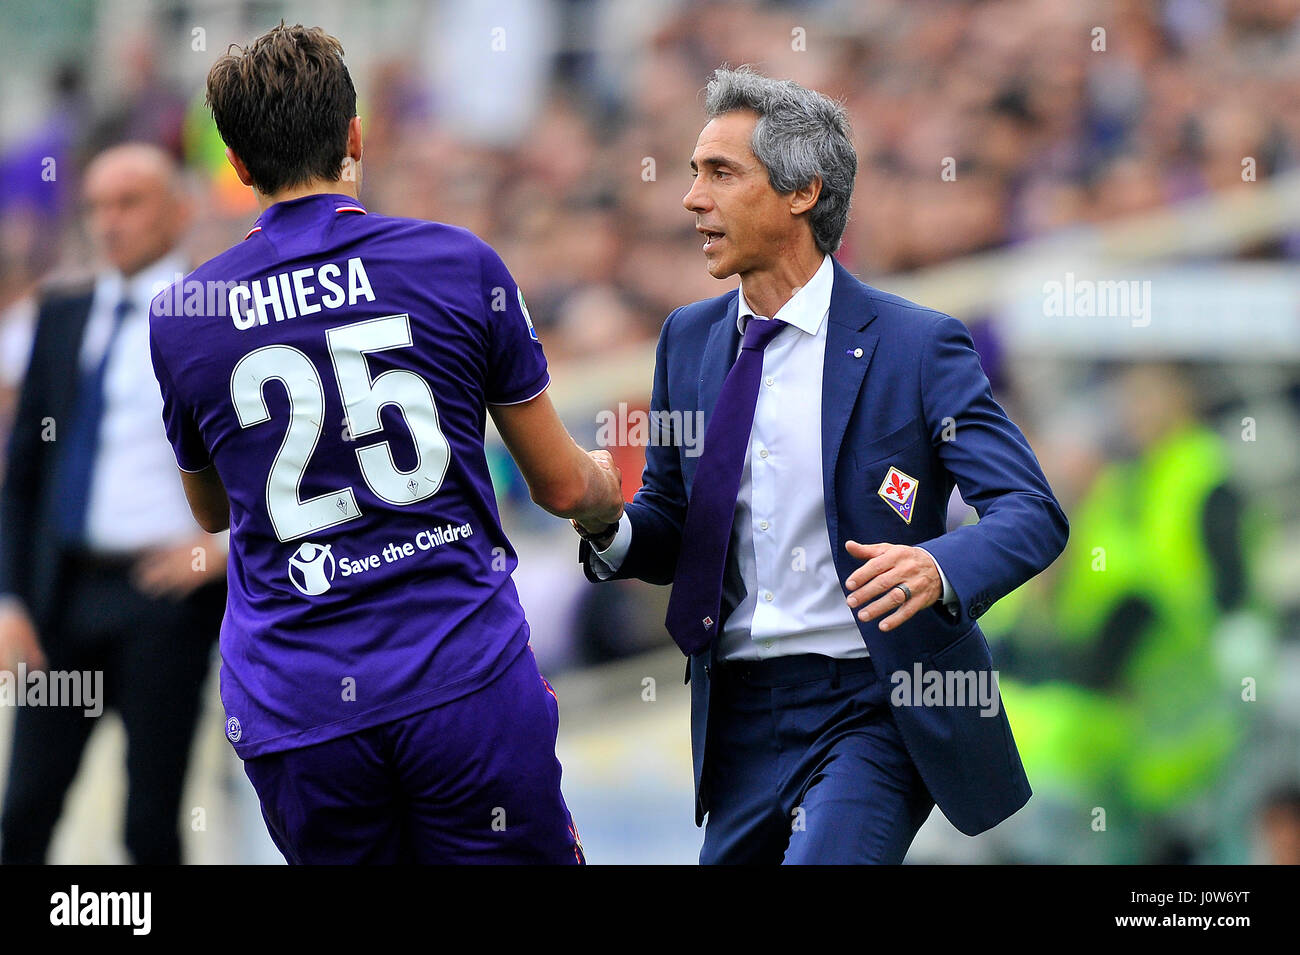 Florence, Italy. 15th Apr, 2017. A.c.f. Fiorentina's head coach Paulo Sousa  and Federico Chiesa during the Italian Serie A soccer match between A.c.f.  Fiorentina and Empoli F.c. at Artemio Franchi Stadium. Credit: